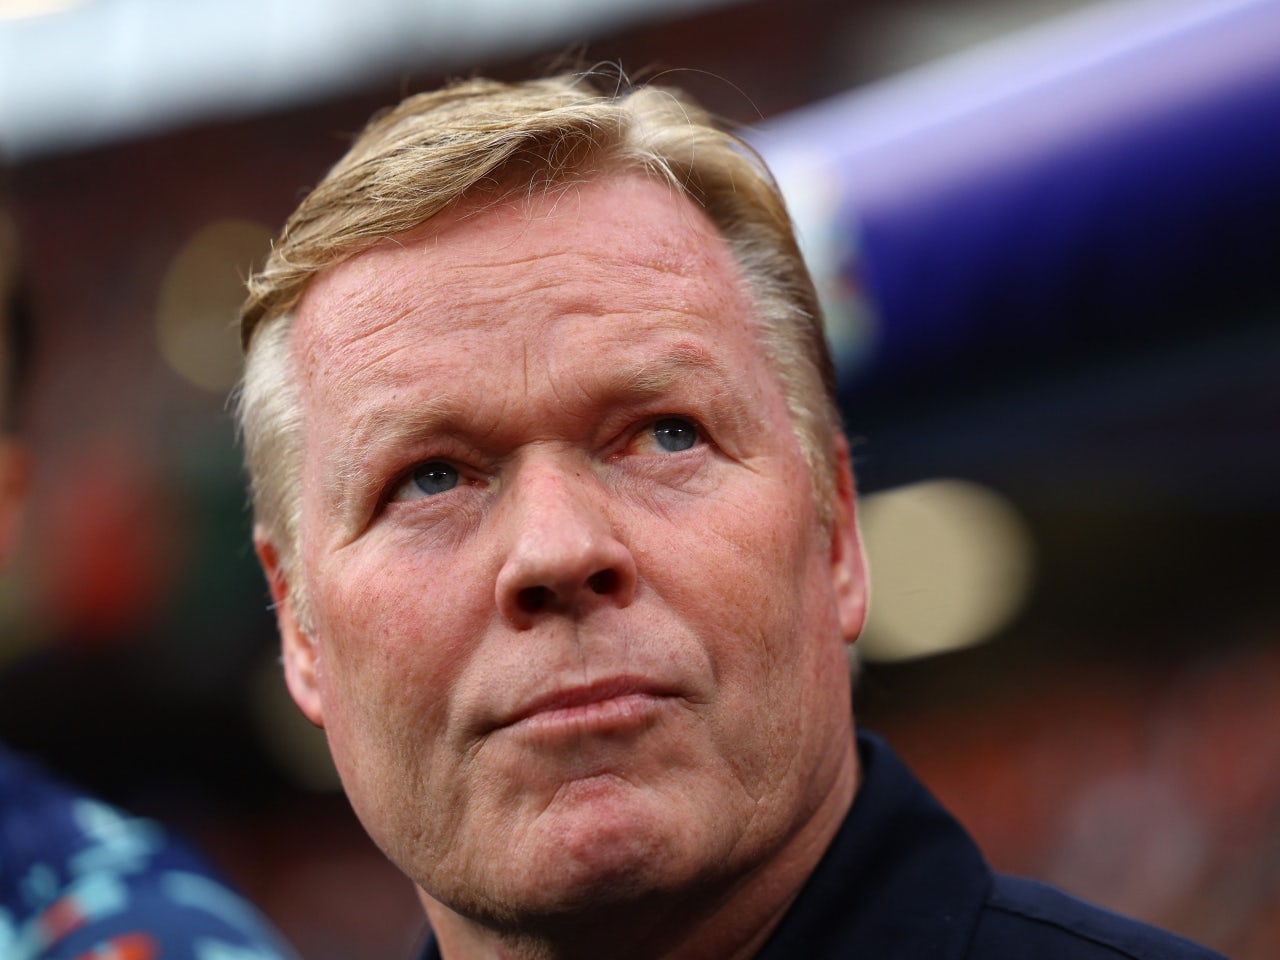 Euro 2024: Ronald Koeman addresses Netherlands future after wife's cancer diagnosis